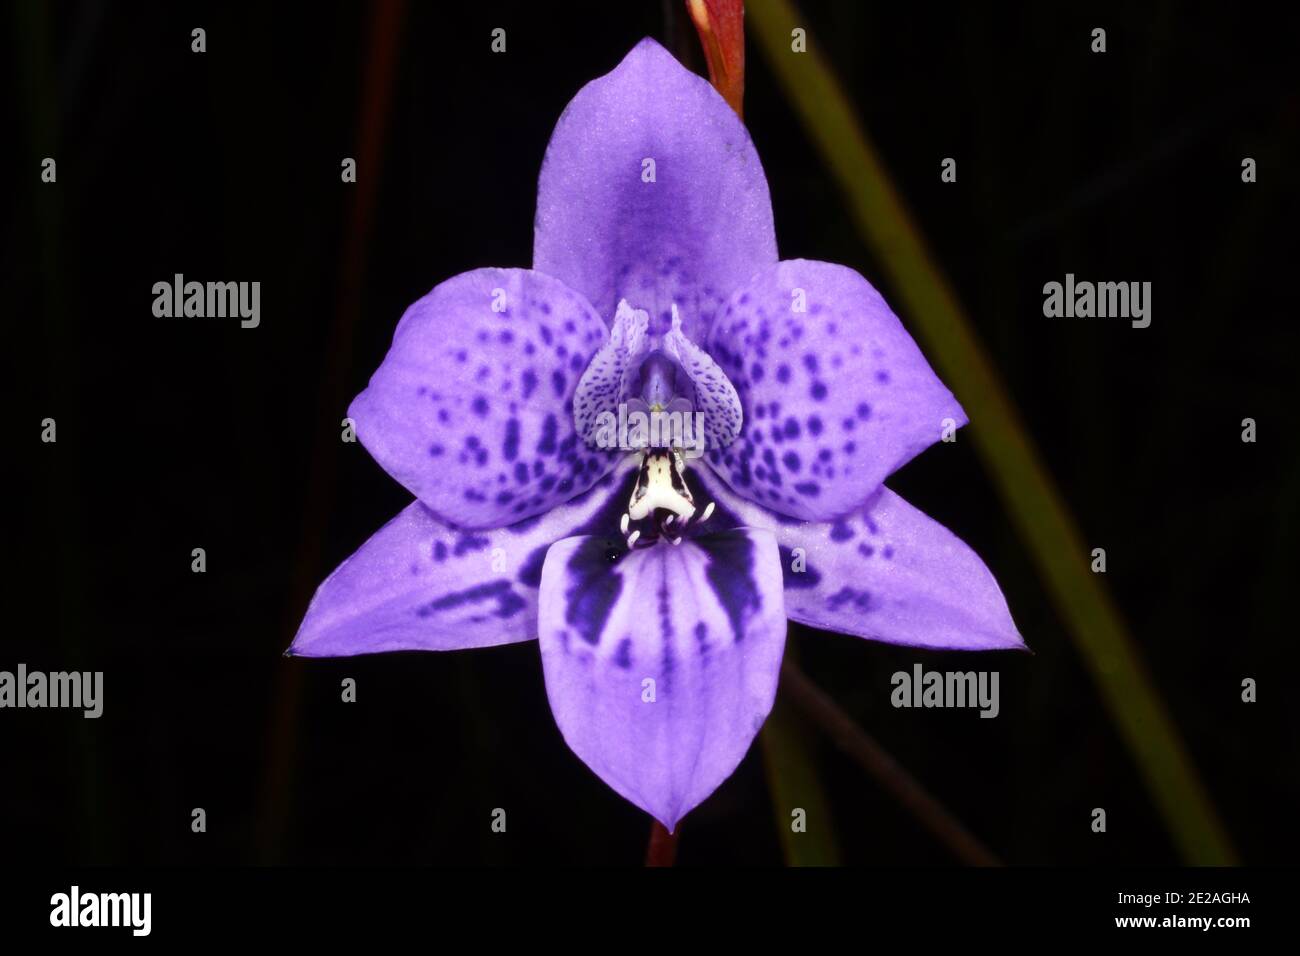 Blue orchid flower of Epiblema grandiflorum, babe-in-a-cradle, habitat on the south coast of Western Australia, frontal view with black background Stock Photo